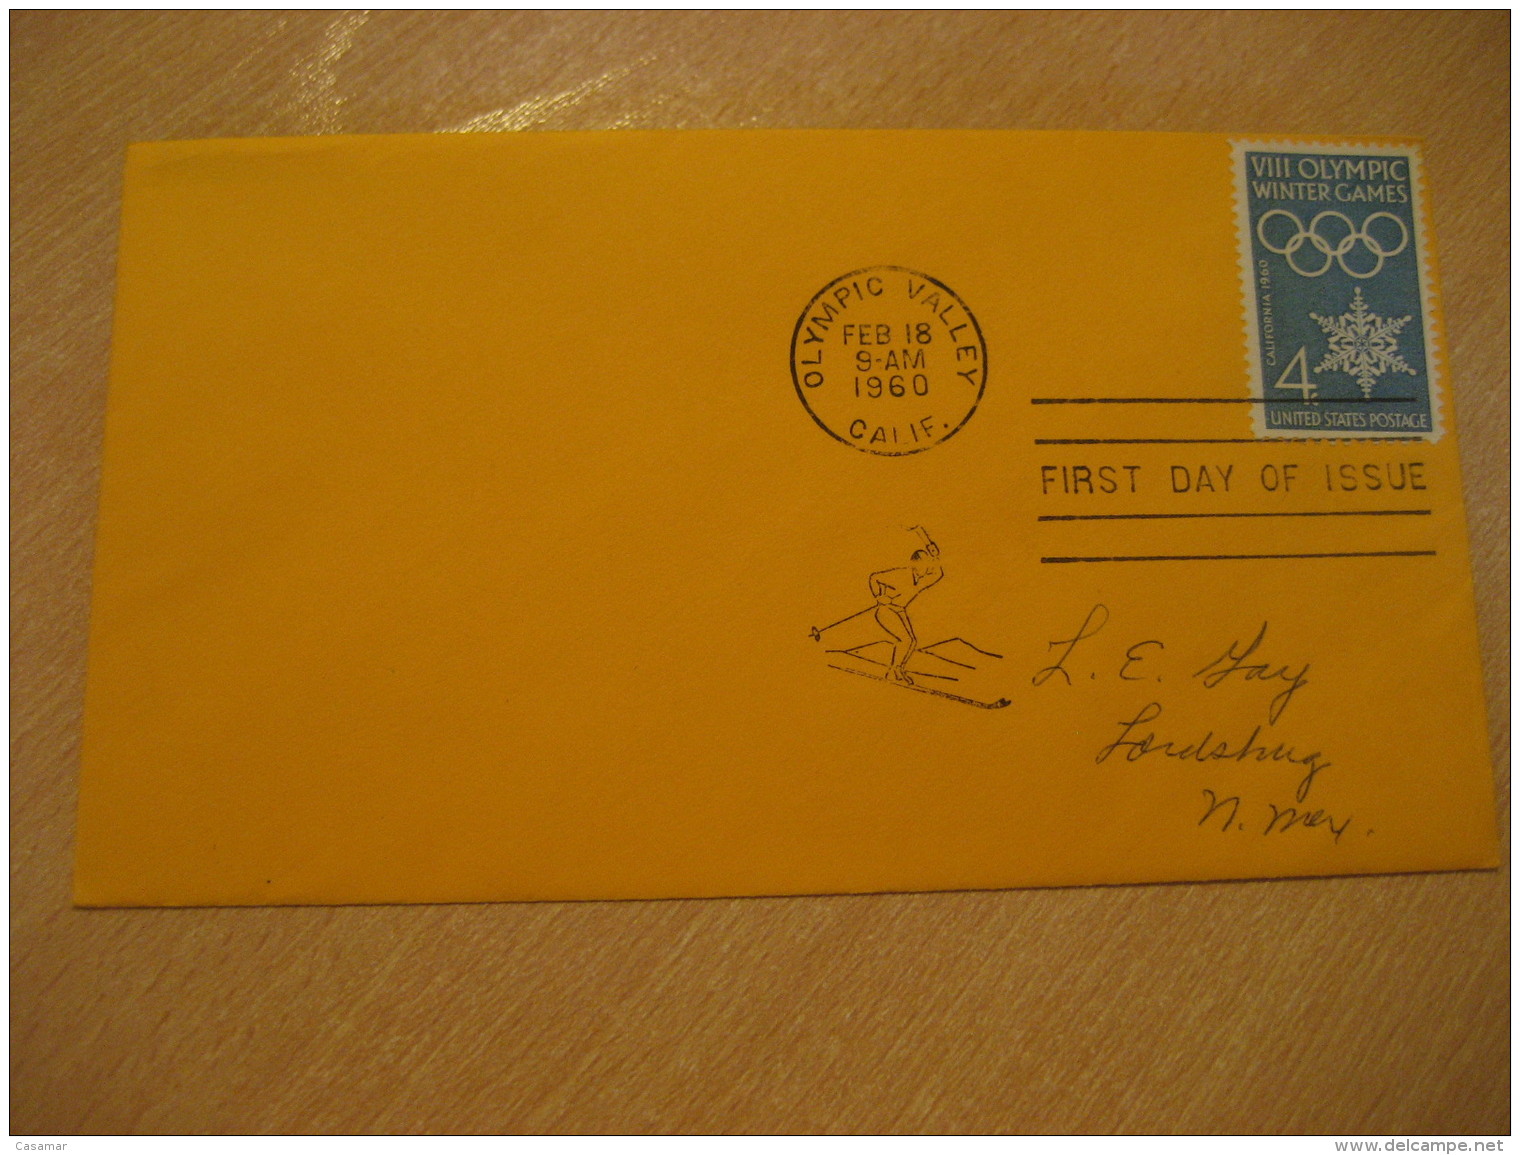 SQUAW VALLEY 1960 Winter Olympic Games Olympics OLYMPIC VALLEY 1960 FDC Cancel Cover USA - Inverno1960: Squaw Valley